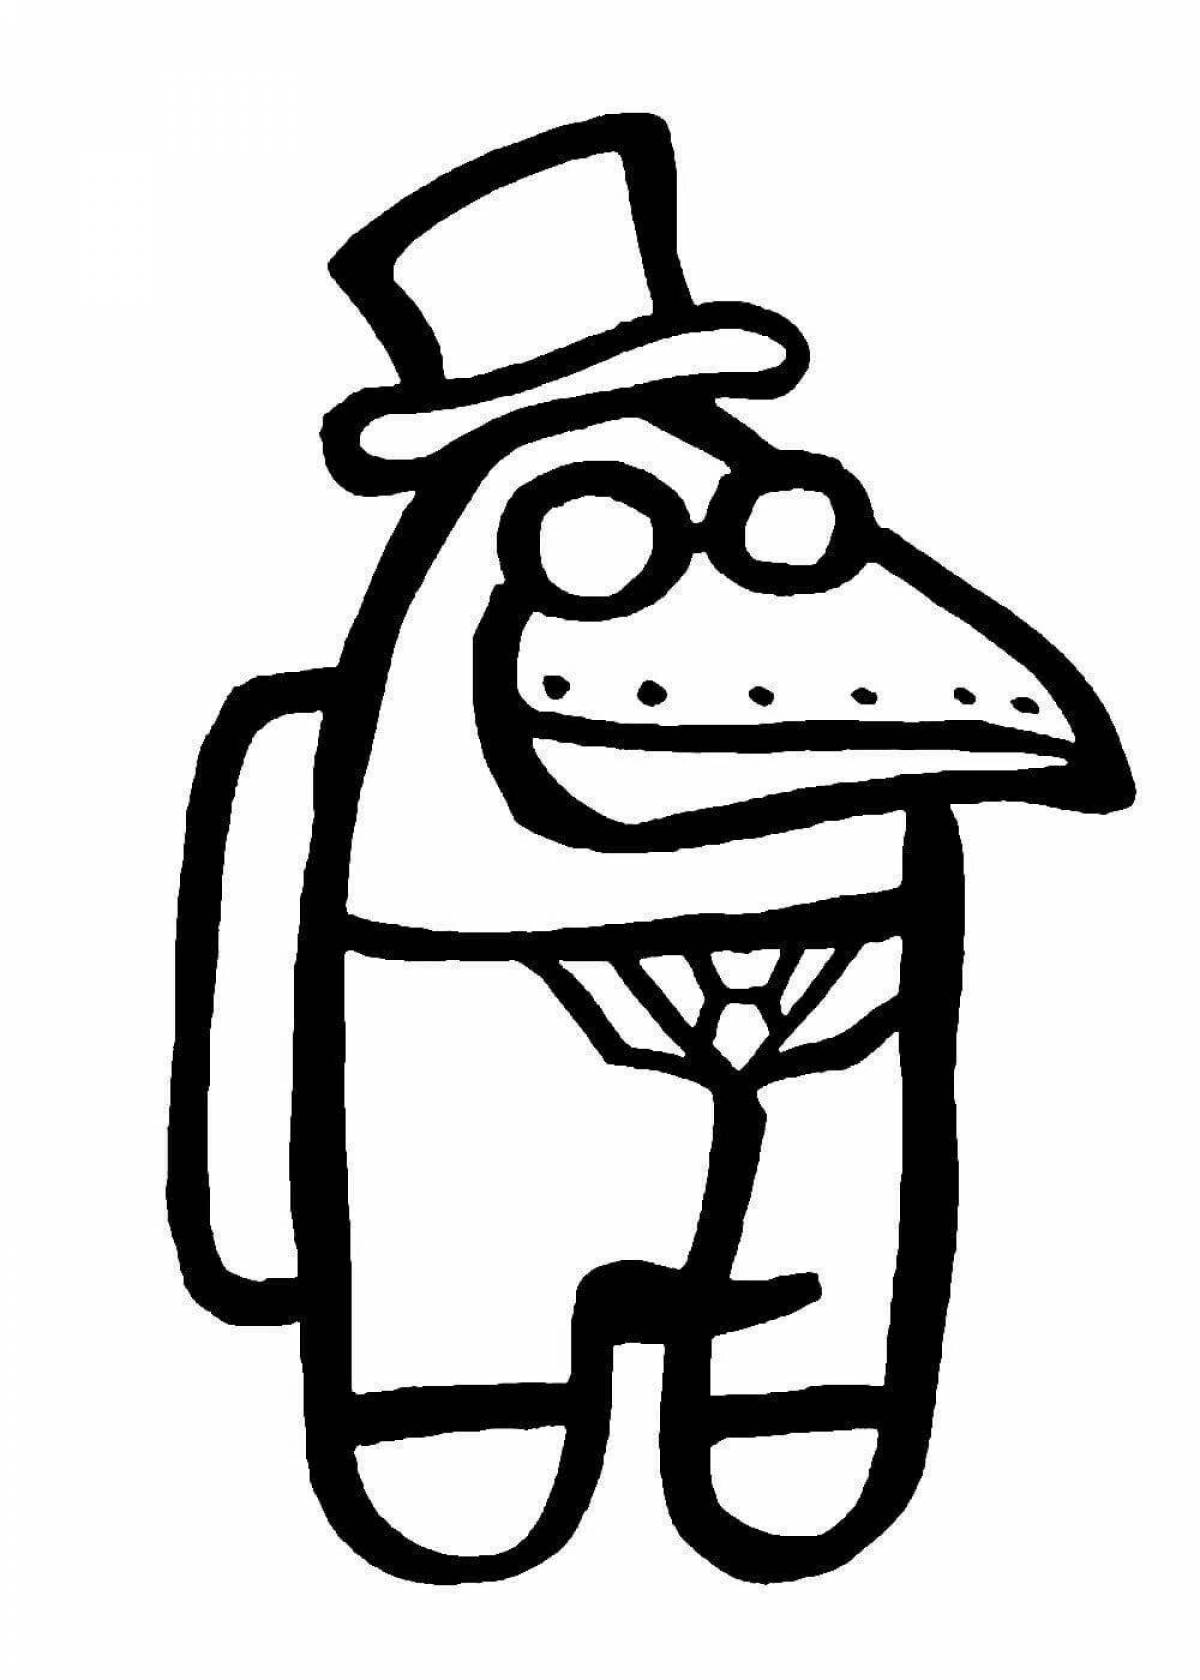 Coloring page bold amogus traitor